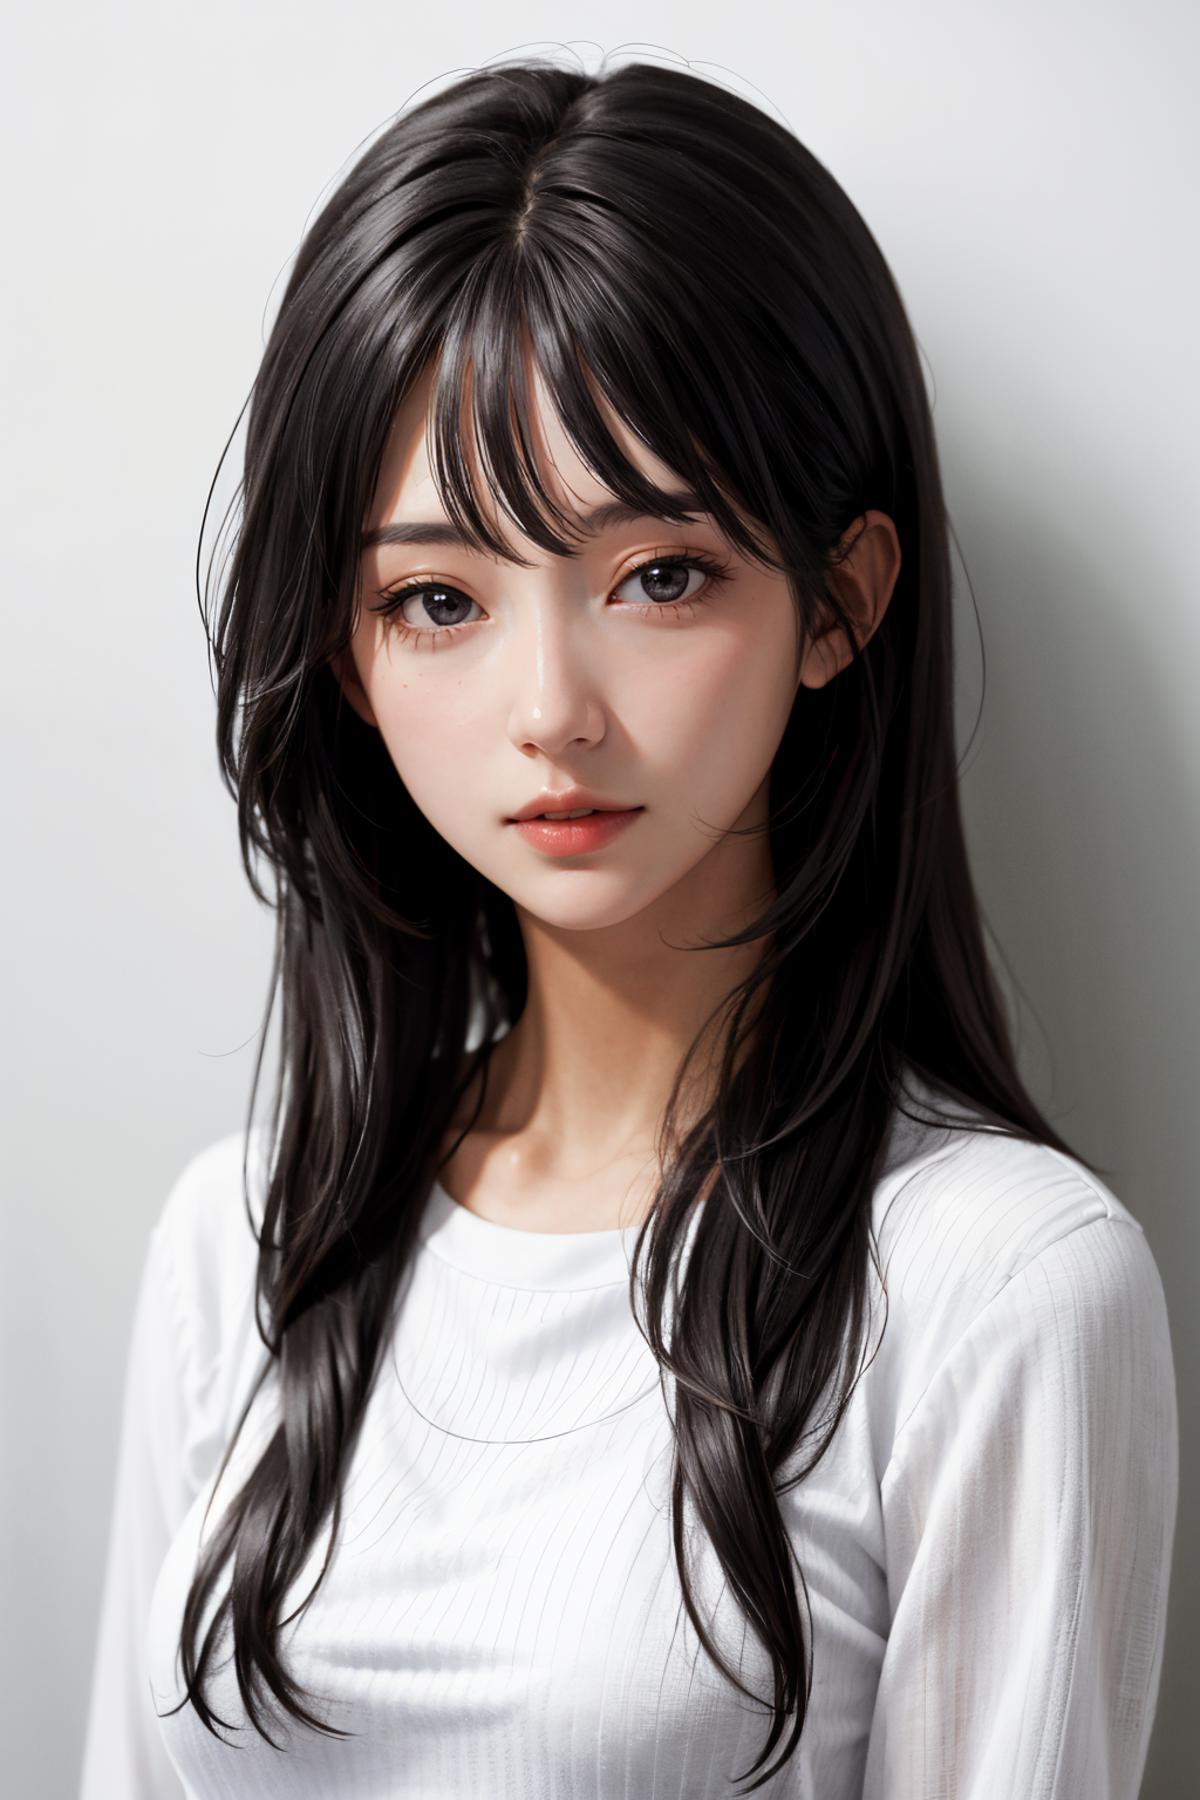 AI model image by MoYou